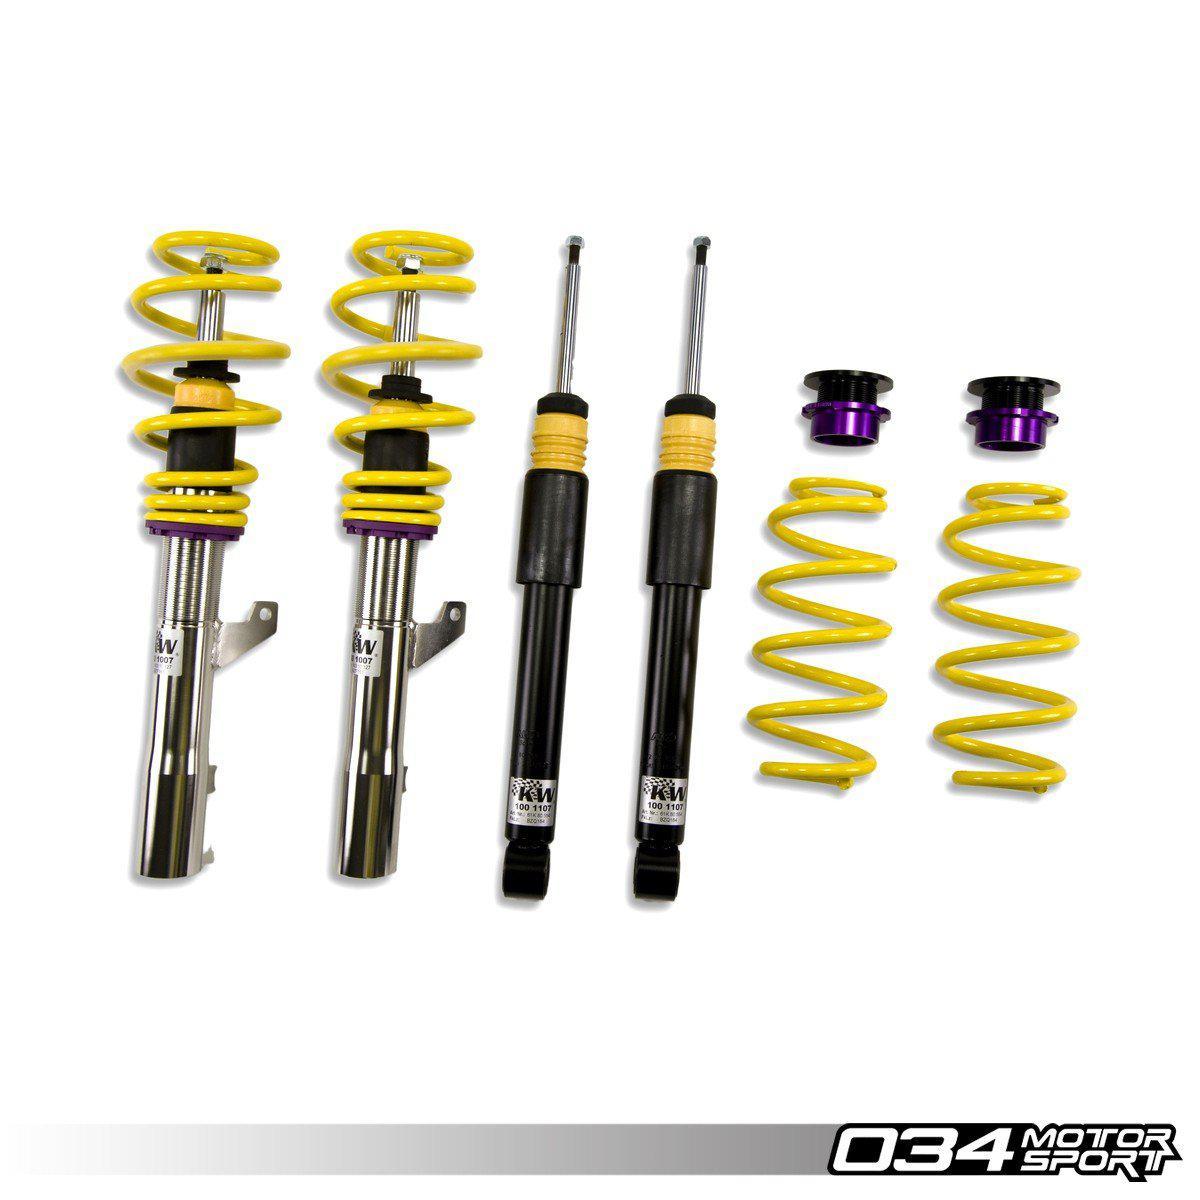 KW Variant 3 Coilover Suspension, C7/C7.5 Audi A6, FWD & Quattro-A Little Tuning Co